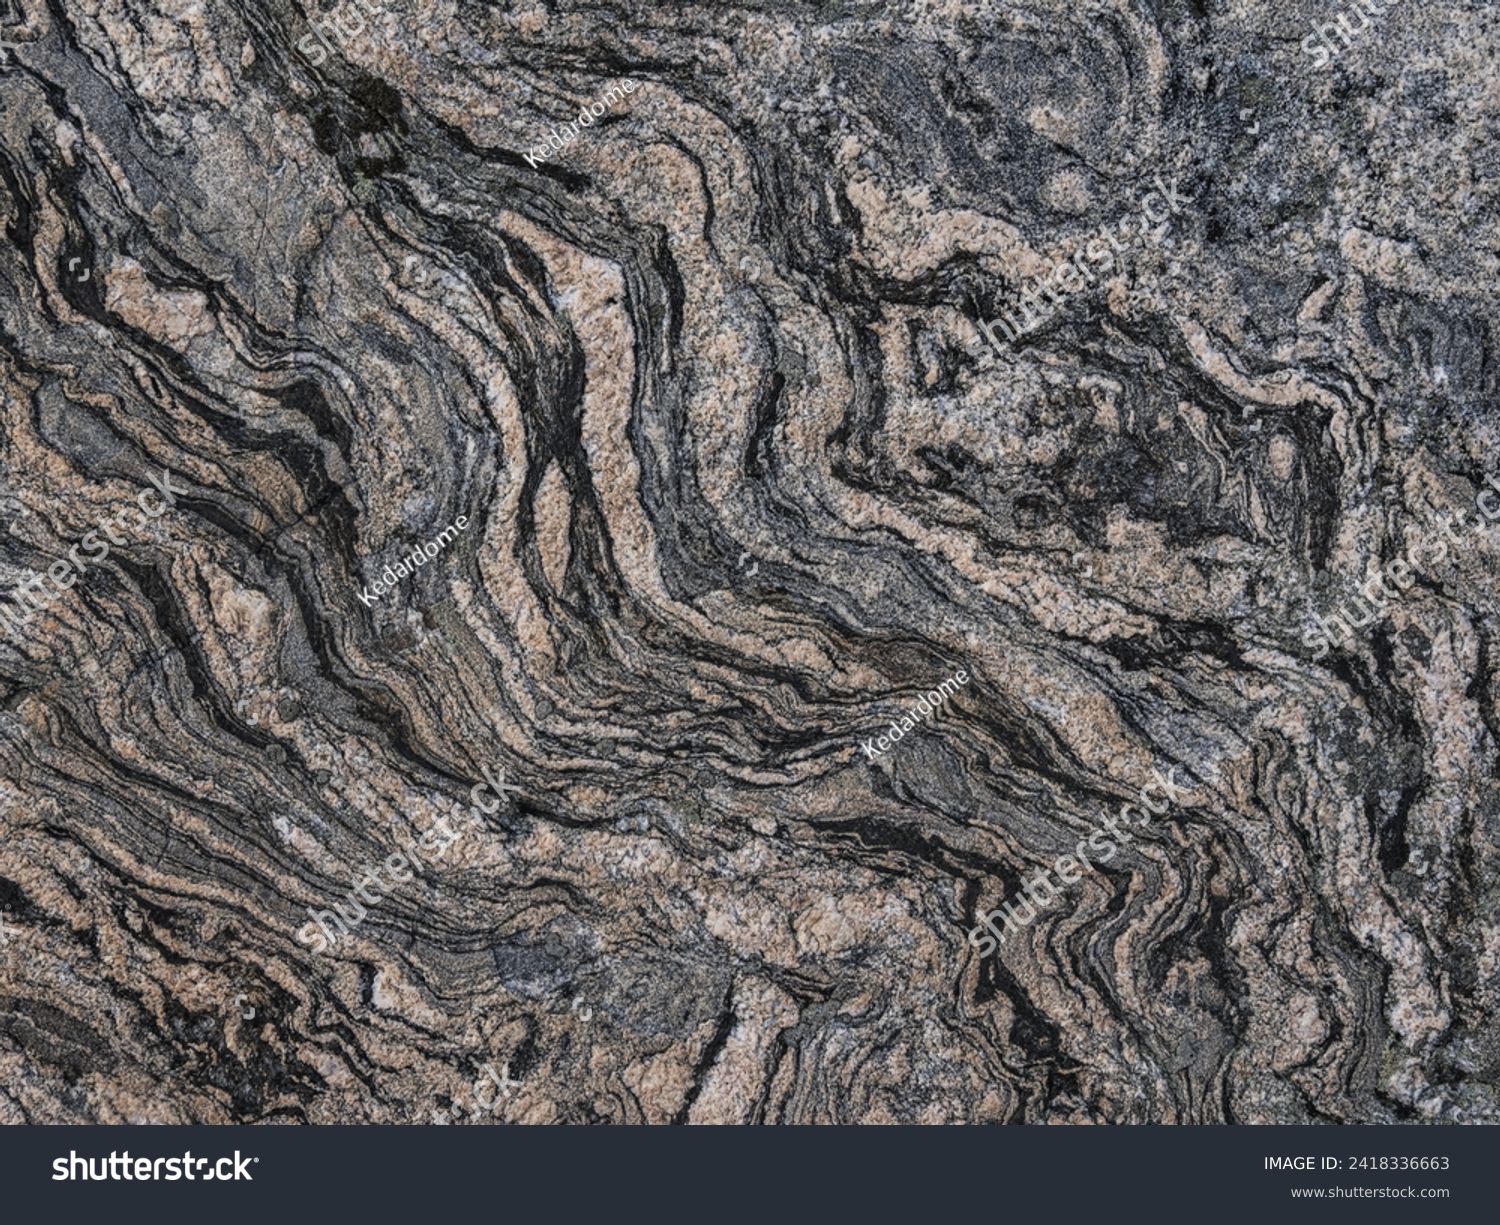 Intricate Patterns of Natural Swirled Rock Formation in Broad Daylight #2418336663